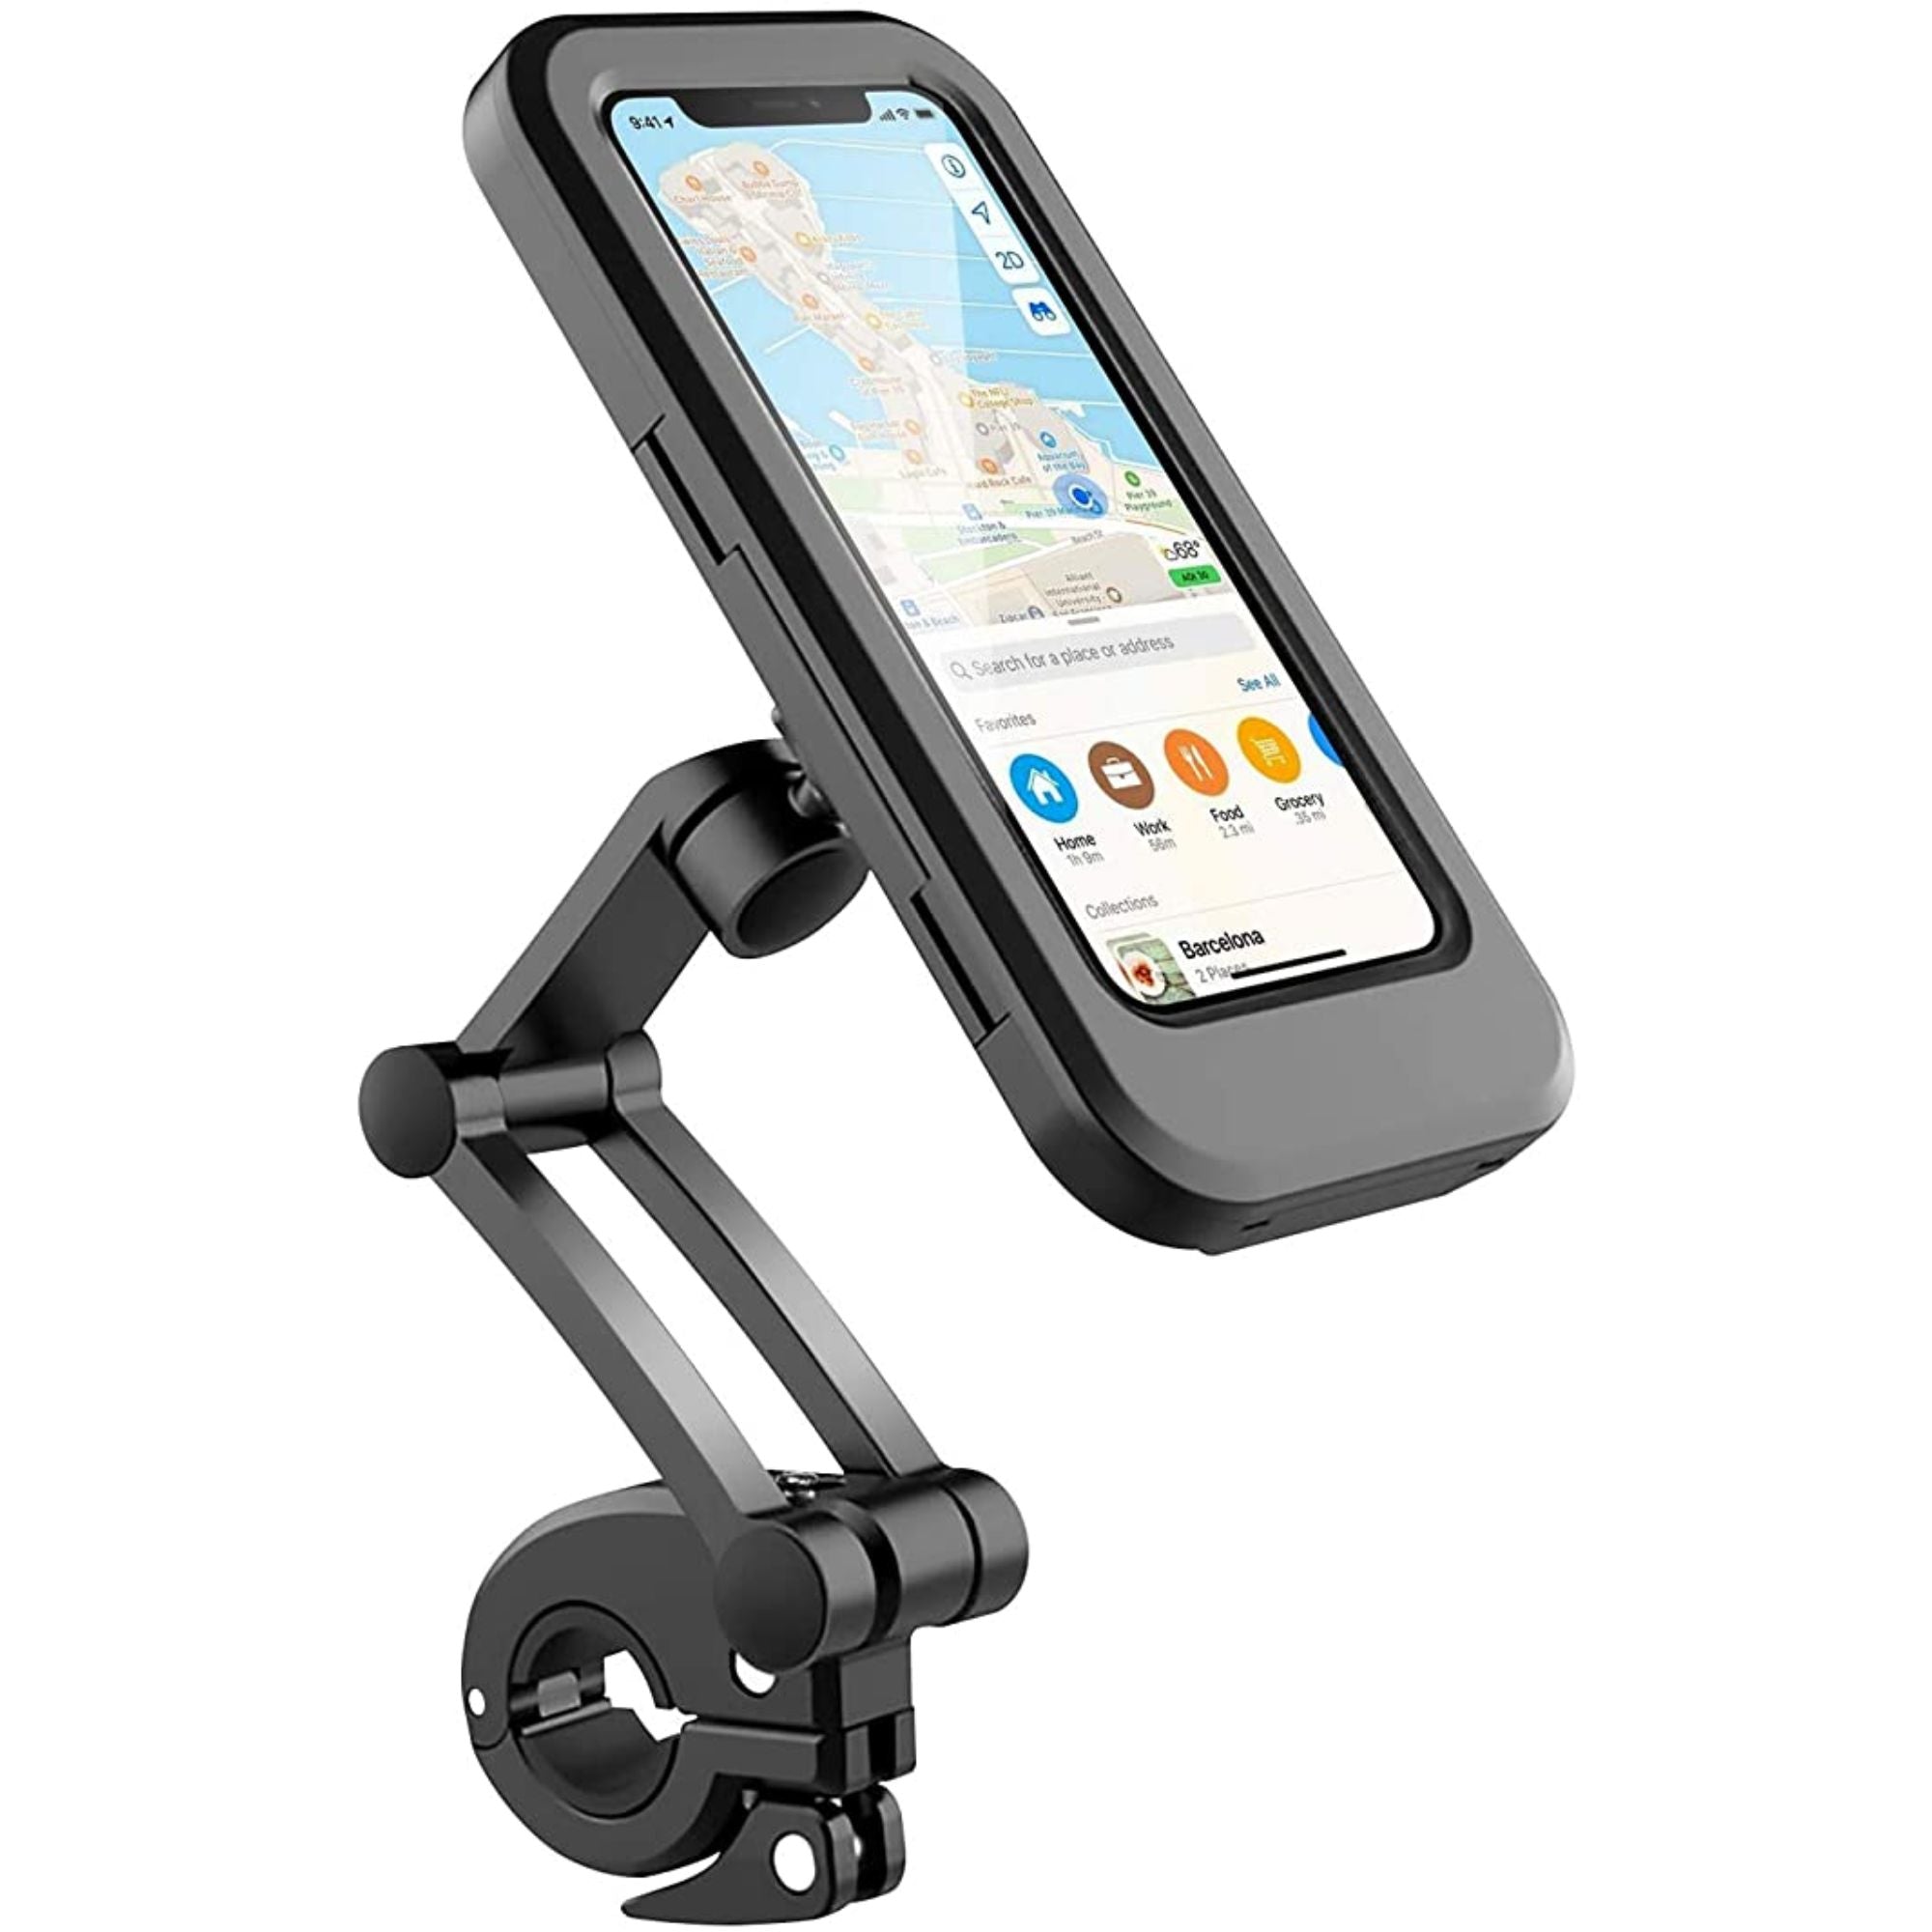 FabSports Waterproof Bicycle Mobile Phone Mount Cell Phone Holder / Cradle  Motorcycle- 360° Adjustable, Universal Phone Holder with TPU Touch-Screen